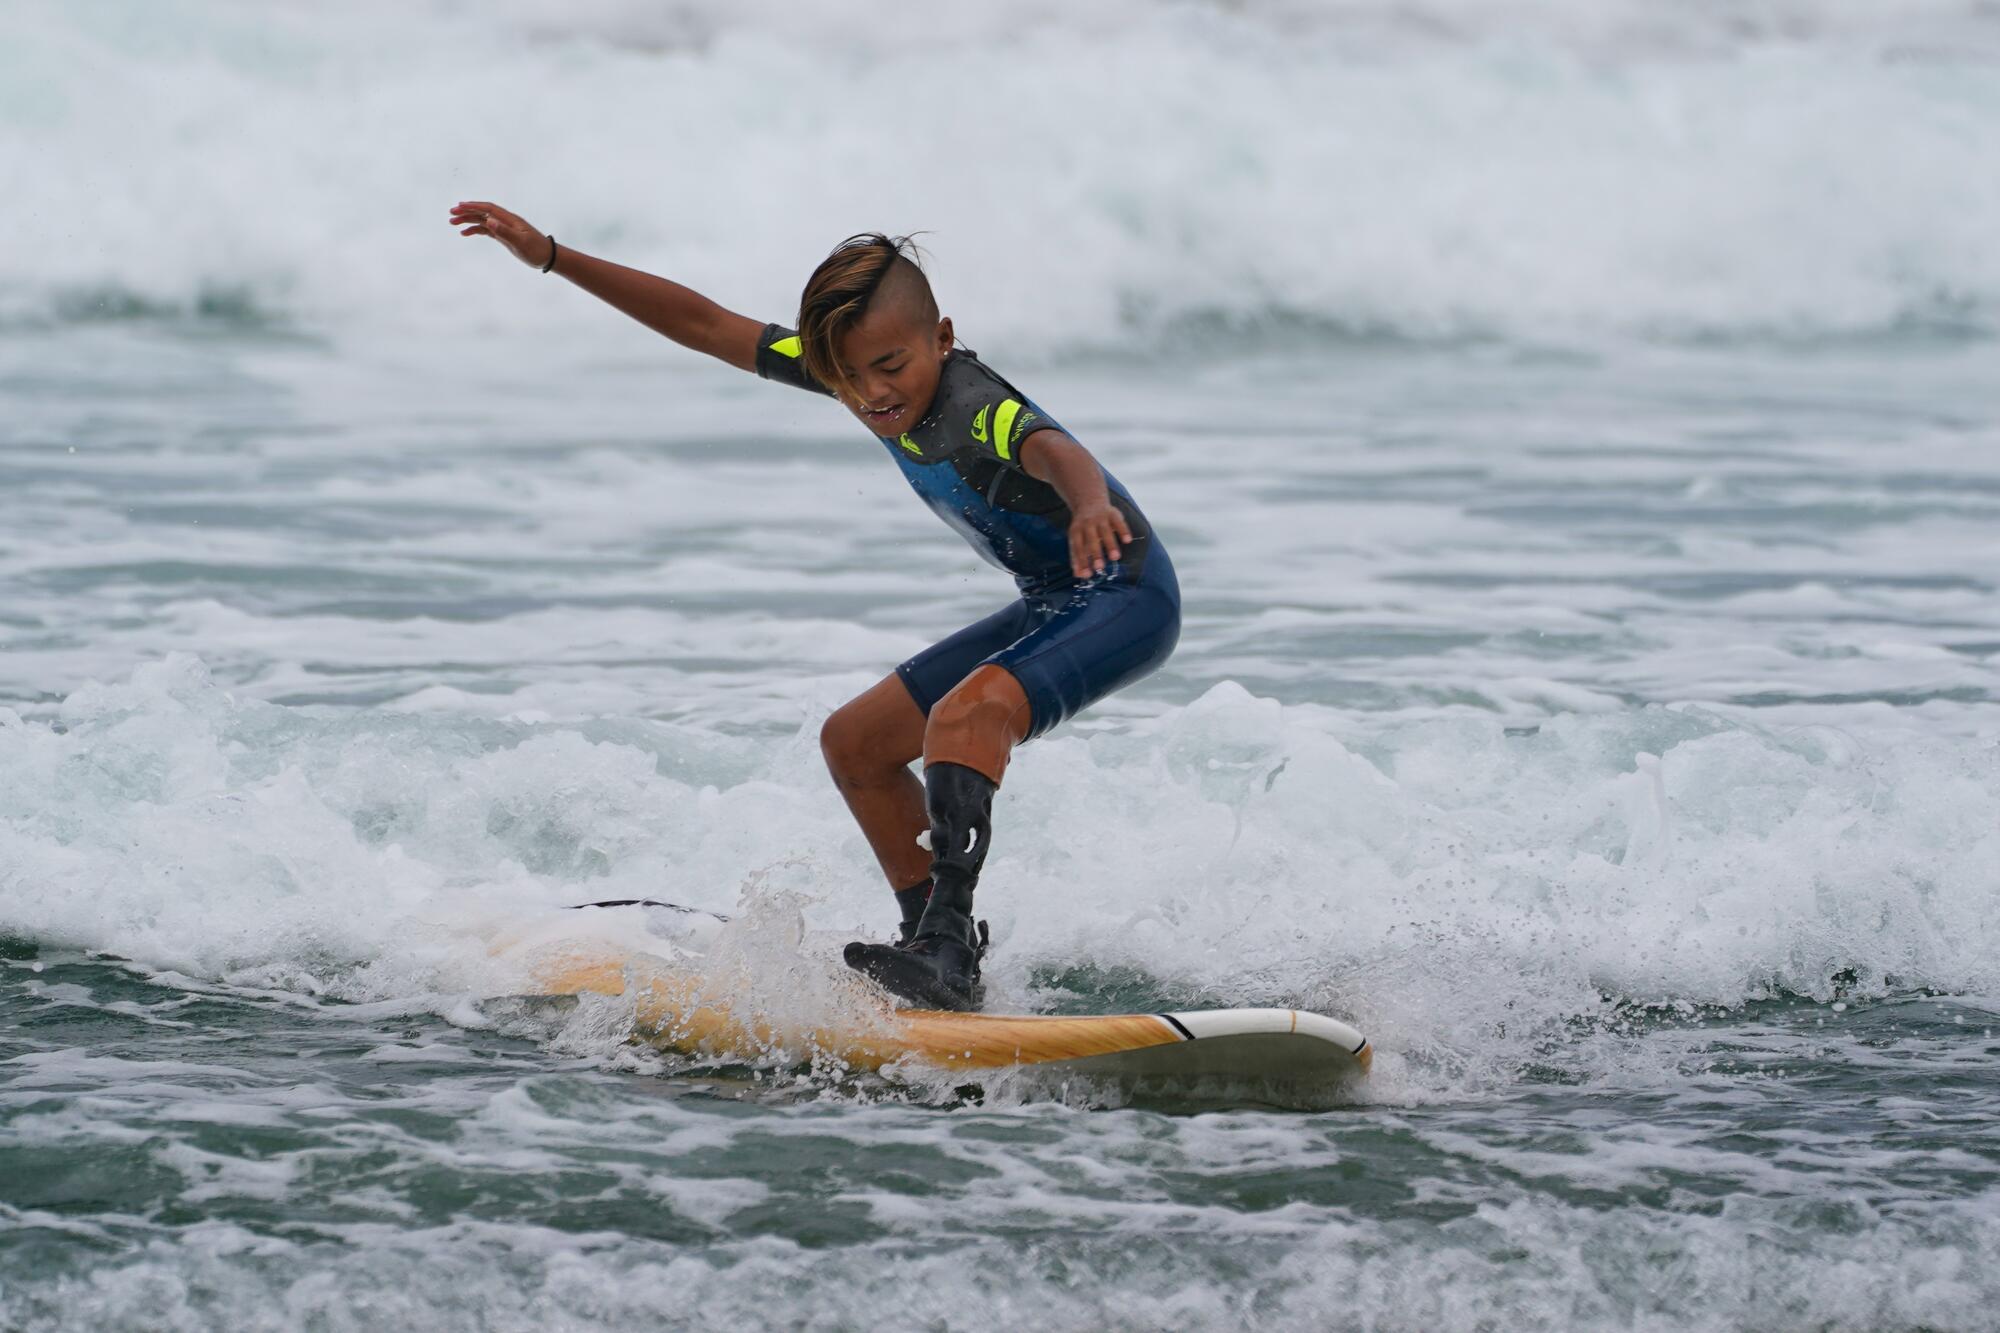 Jonah Villamil, 12, wears his 3-D printed prosthetic leg while successfully standing up on his board in the low surf.